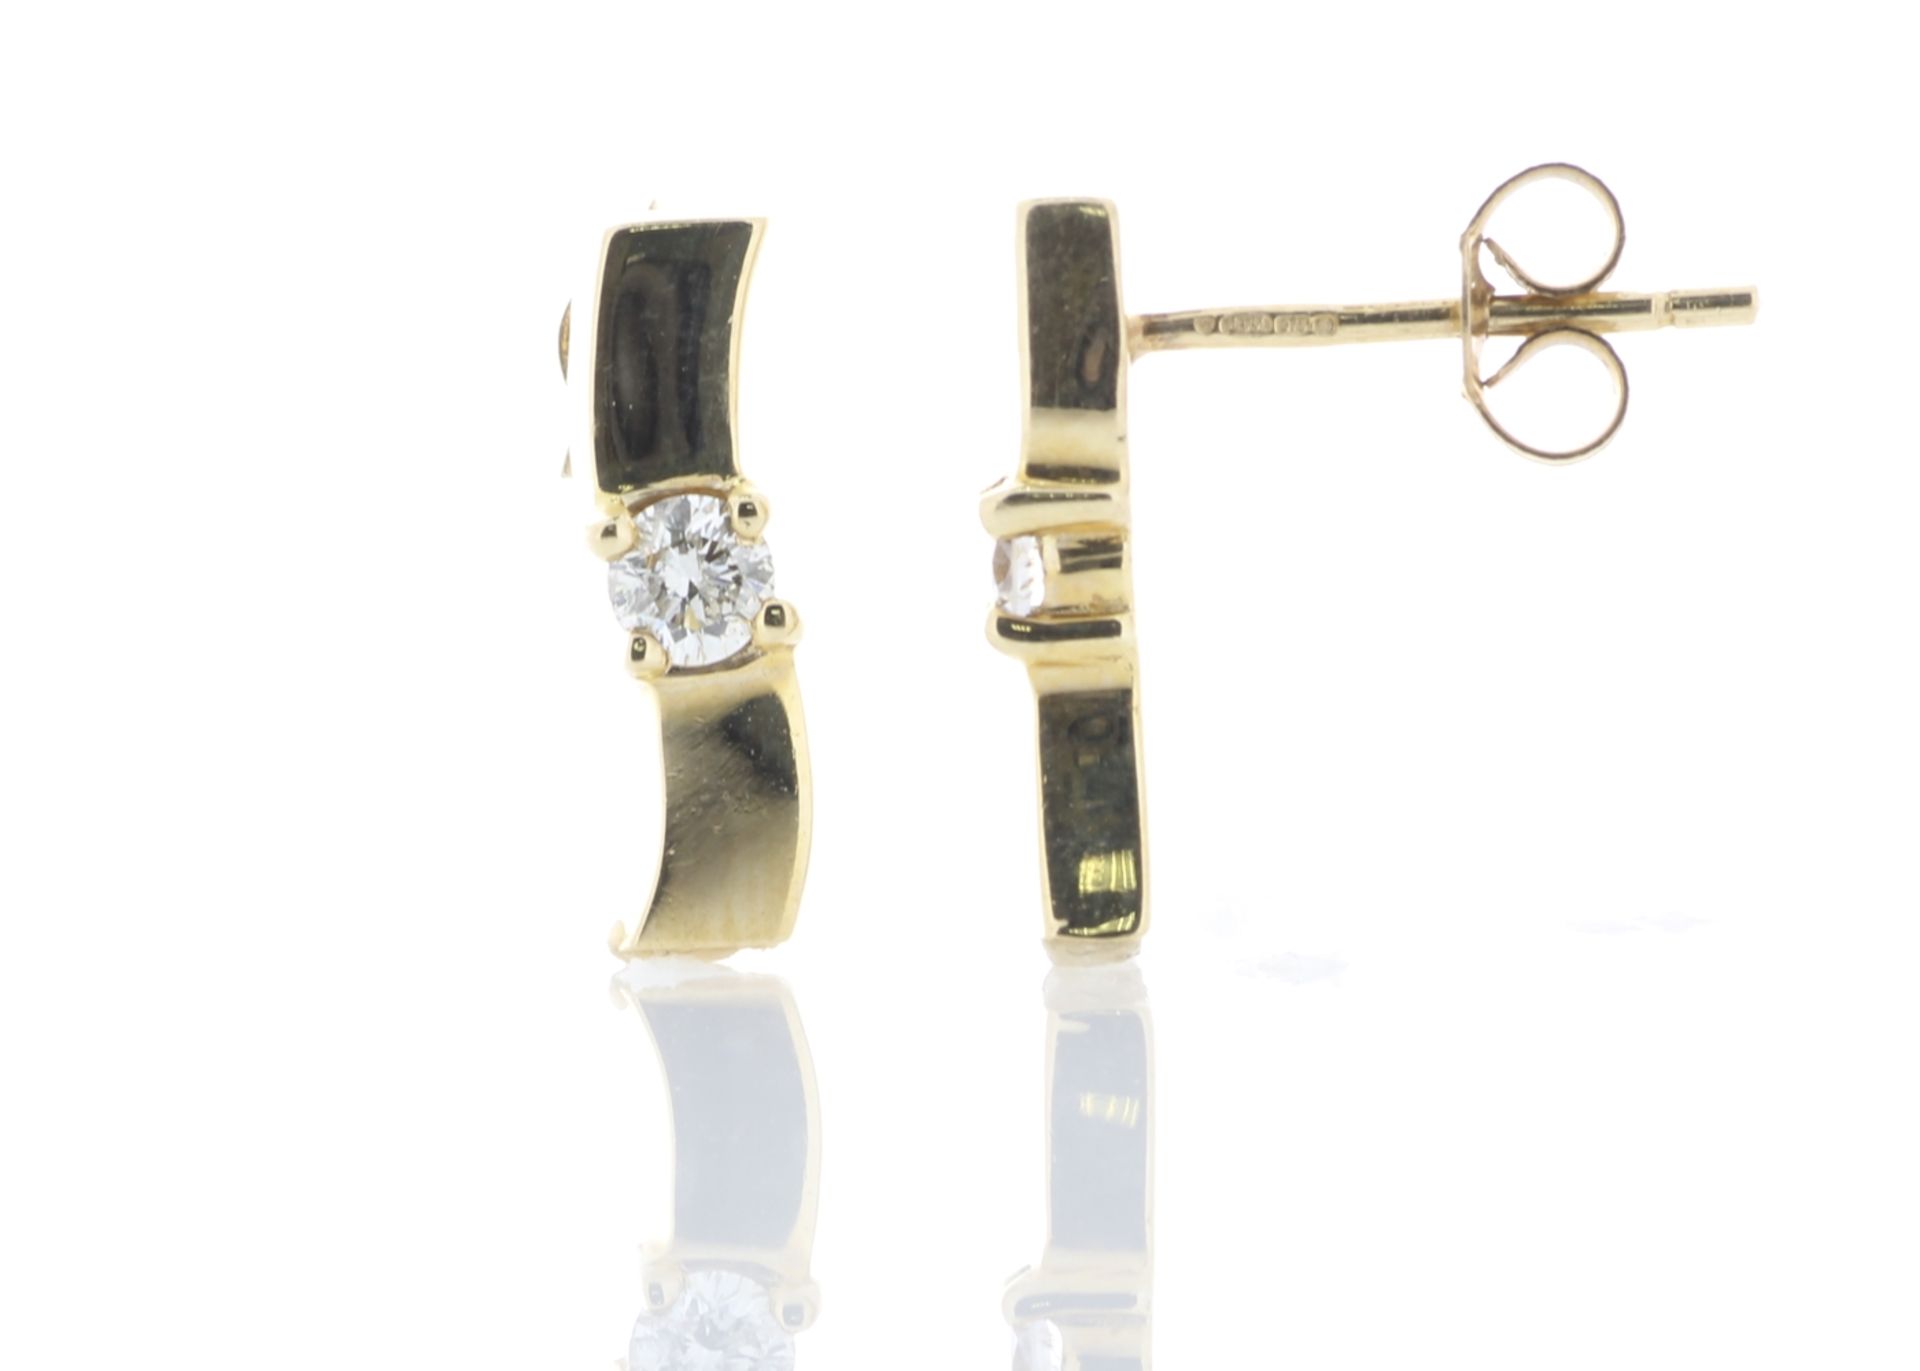 9ct Yellow Gold Wave Diamond Set Earrings 0.20 Carats - Valued by AGI £358.00 - These charming 9ct